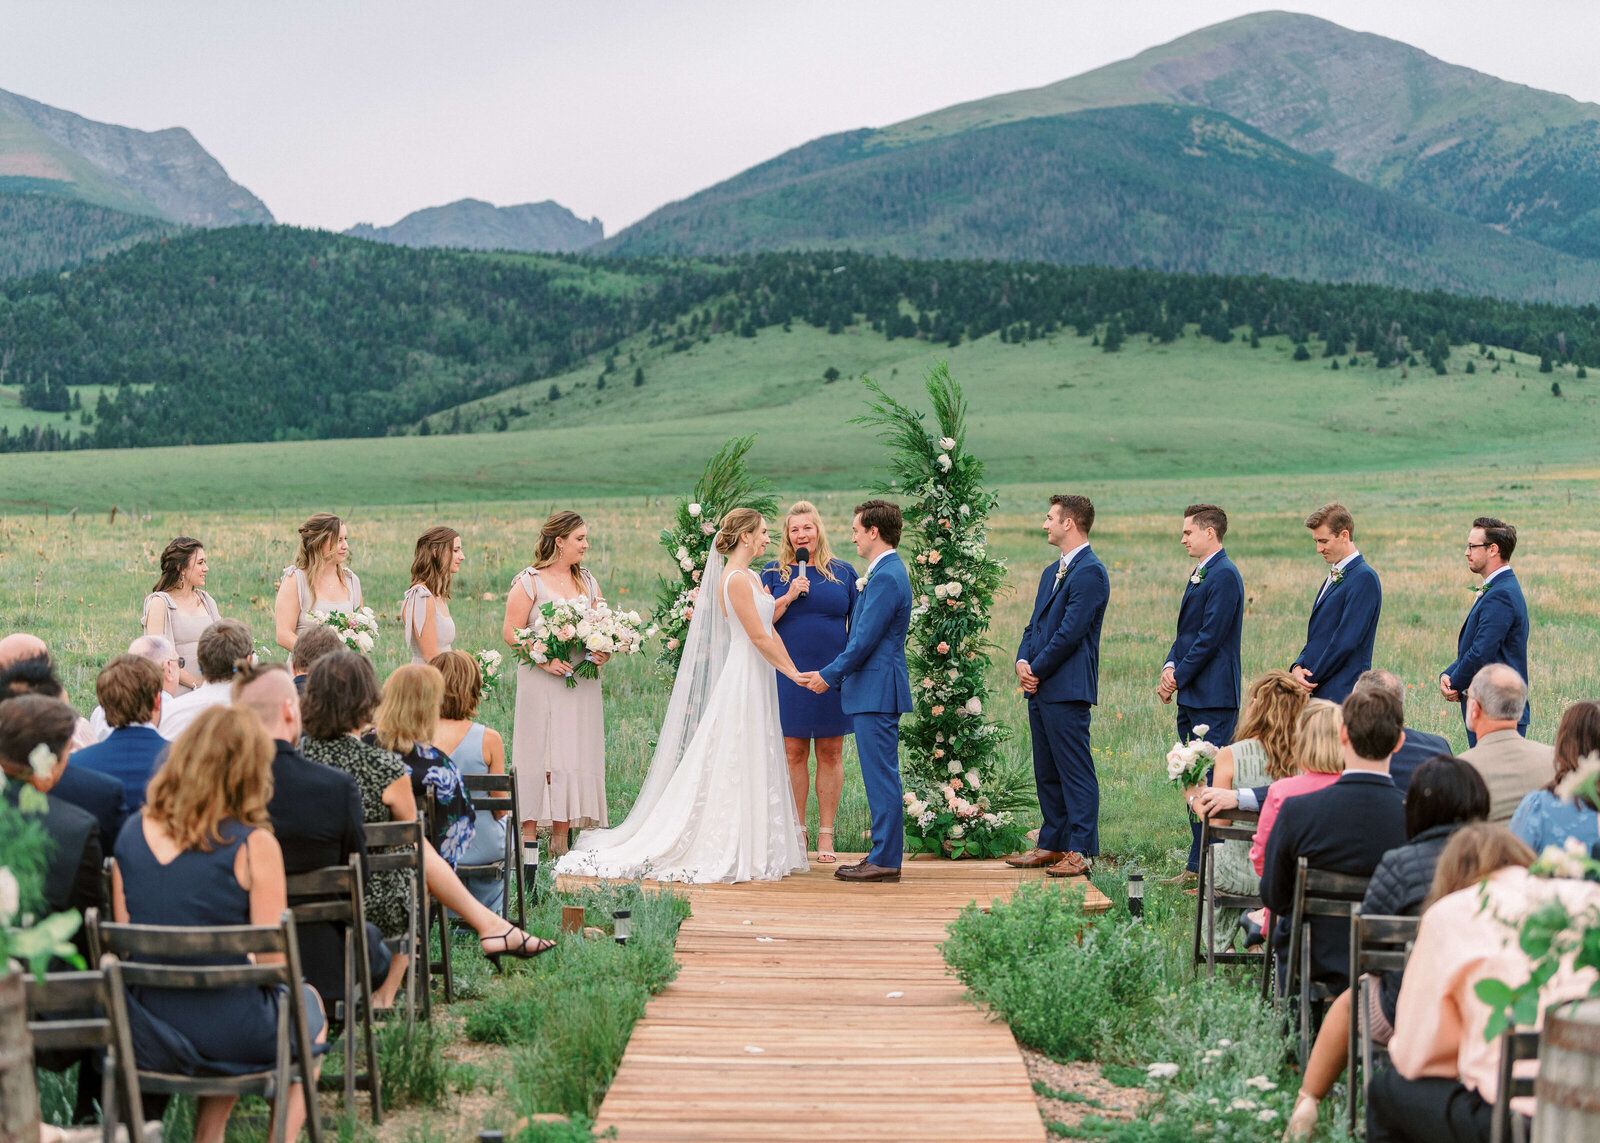 Emotional vows are shared during a wedding in front of a mountain